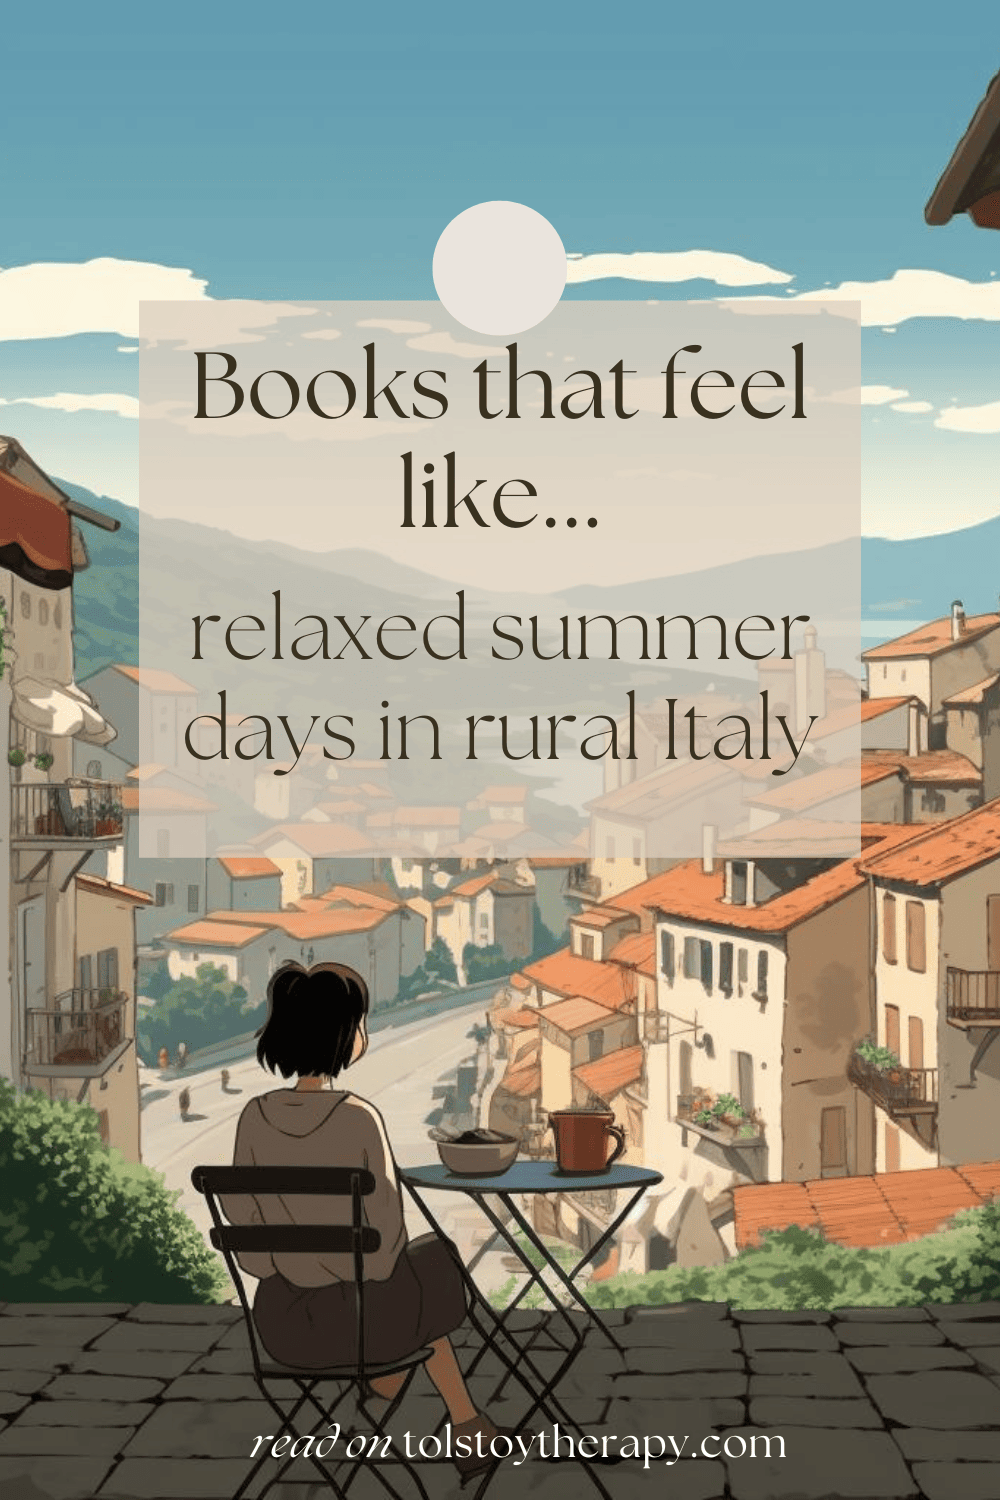 books that feel like relaxed summer days in rural Italy